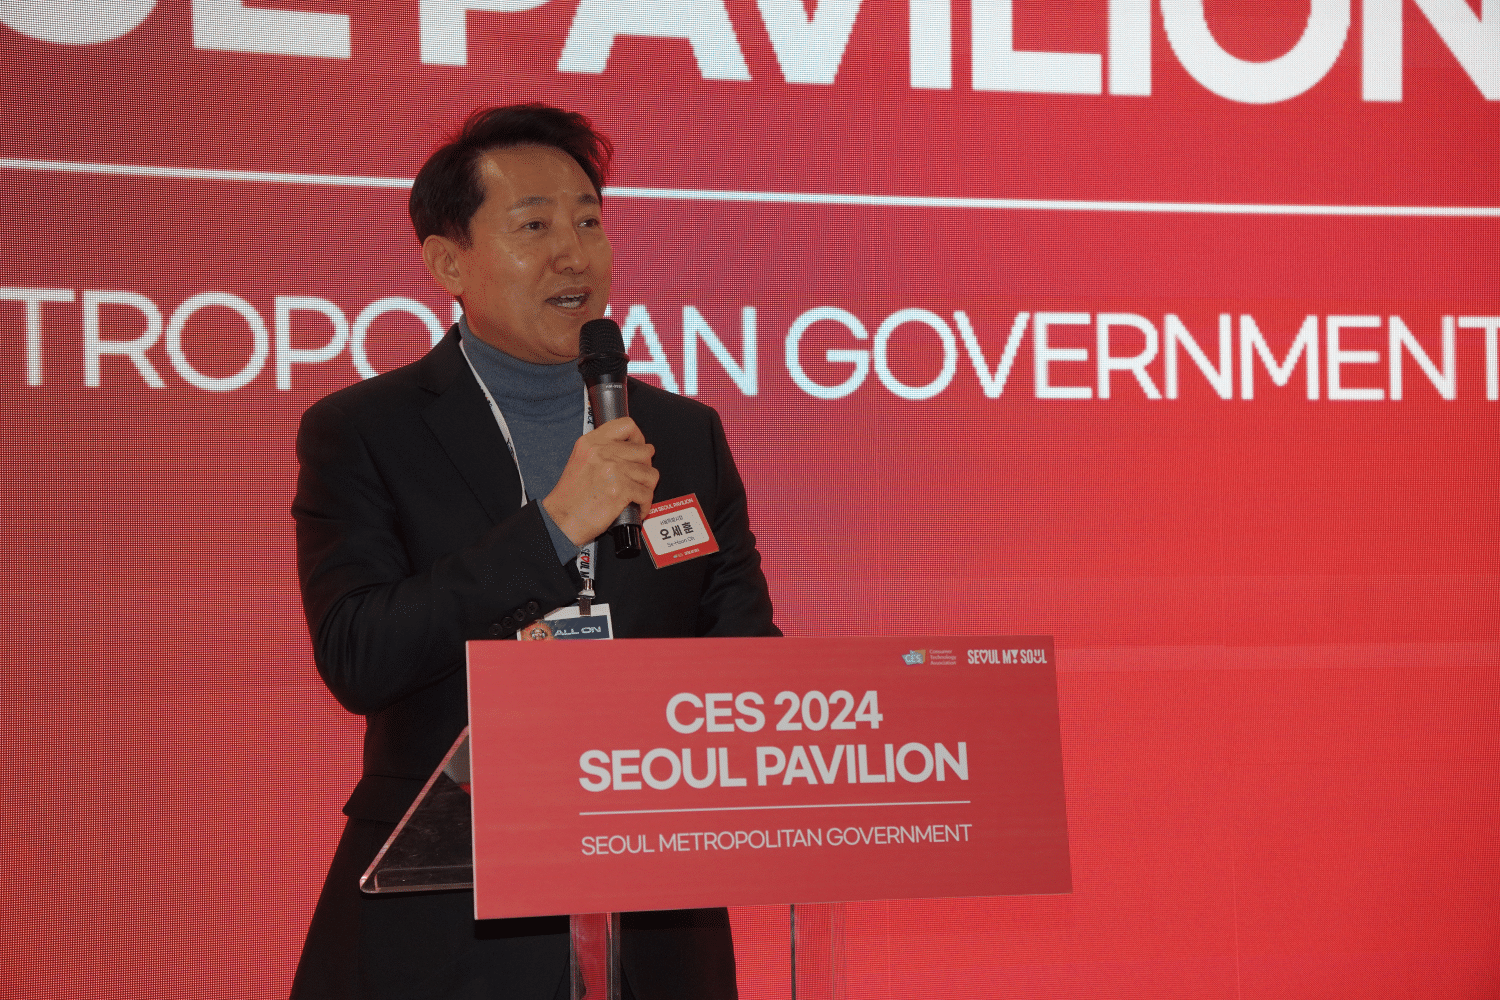 Mayor Oh Se-hoon gave an opening speech to start the first day of the Seoul Pavilion